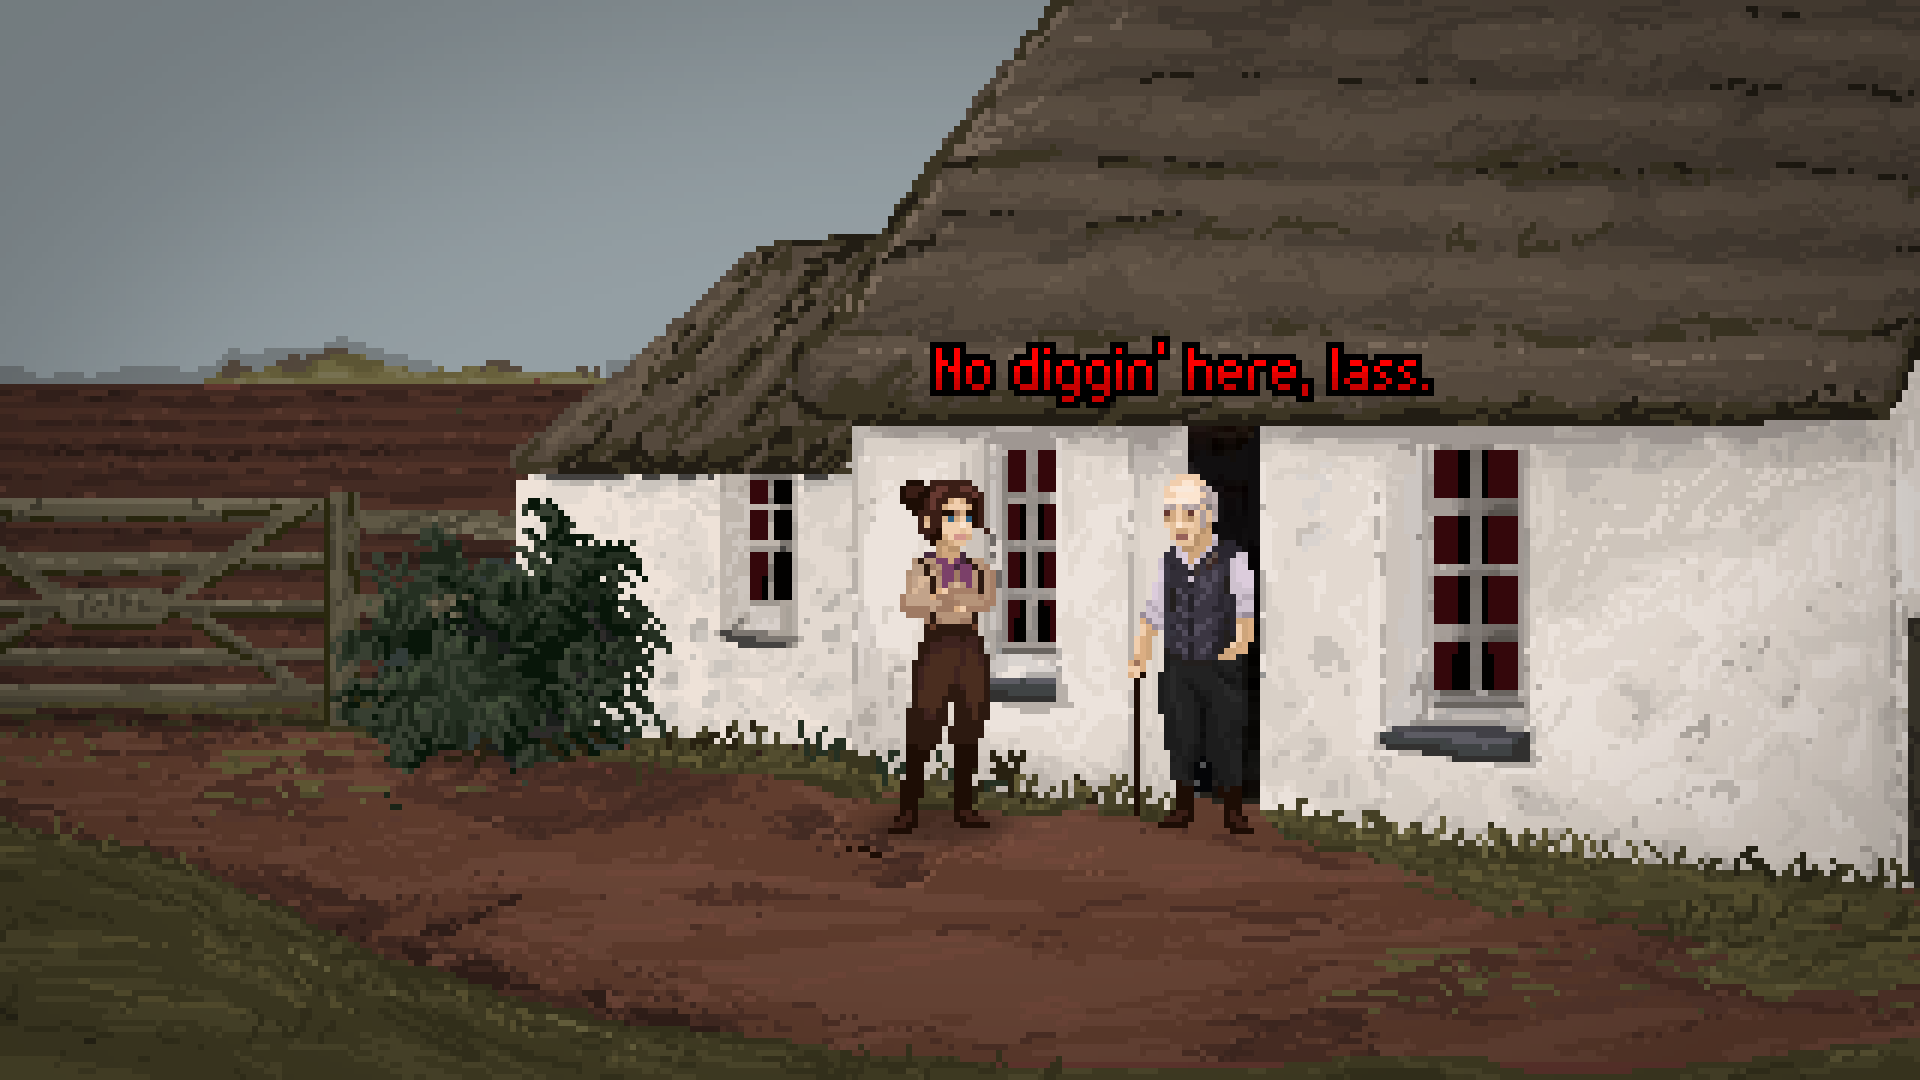 A woman converses with an old man outside a cottage in The Excavation Of Hob's Barrow.